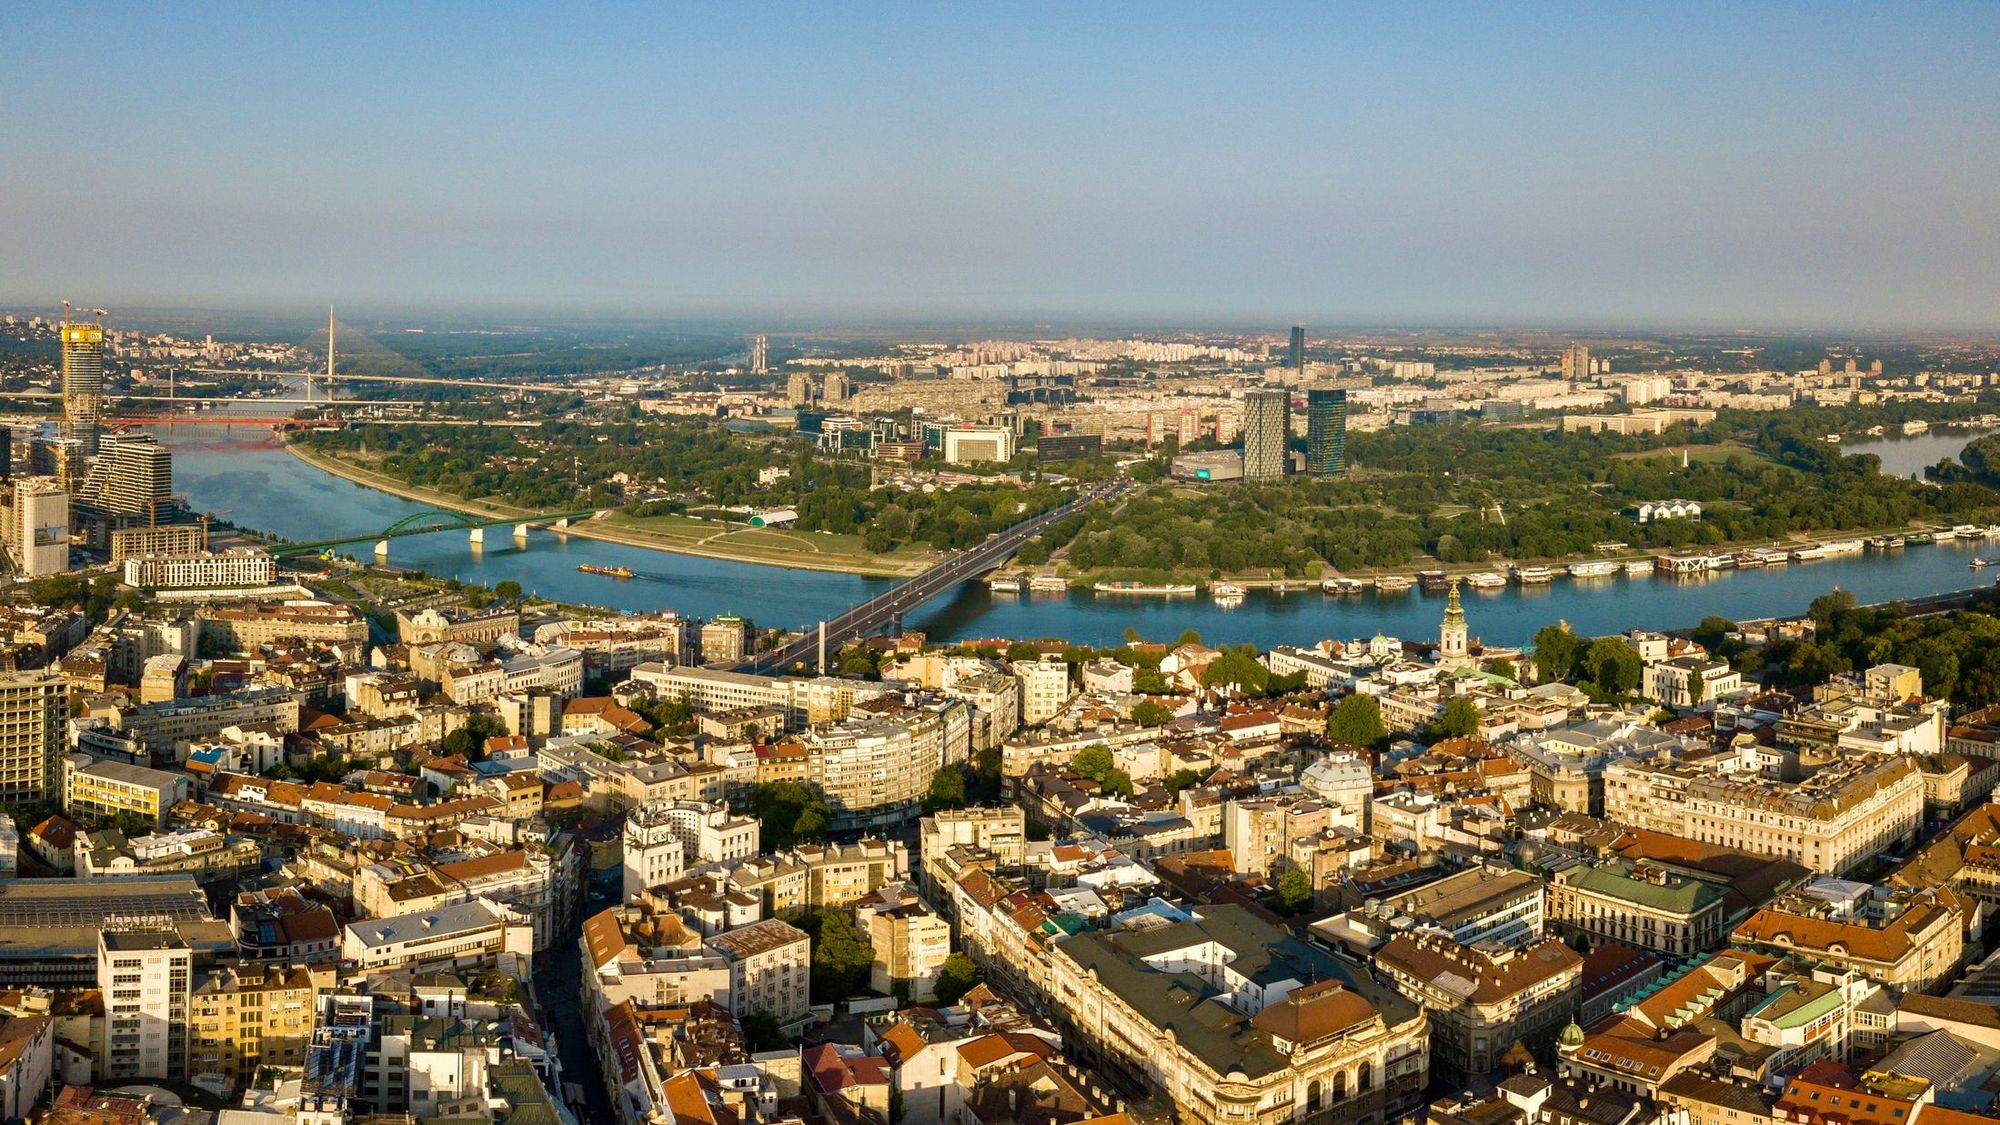 The drone aerial view of Belgrade along the River Danube, Serbia.